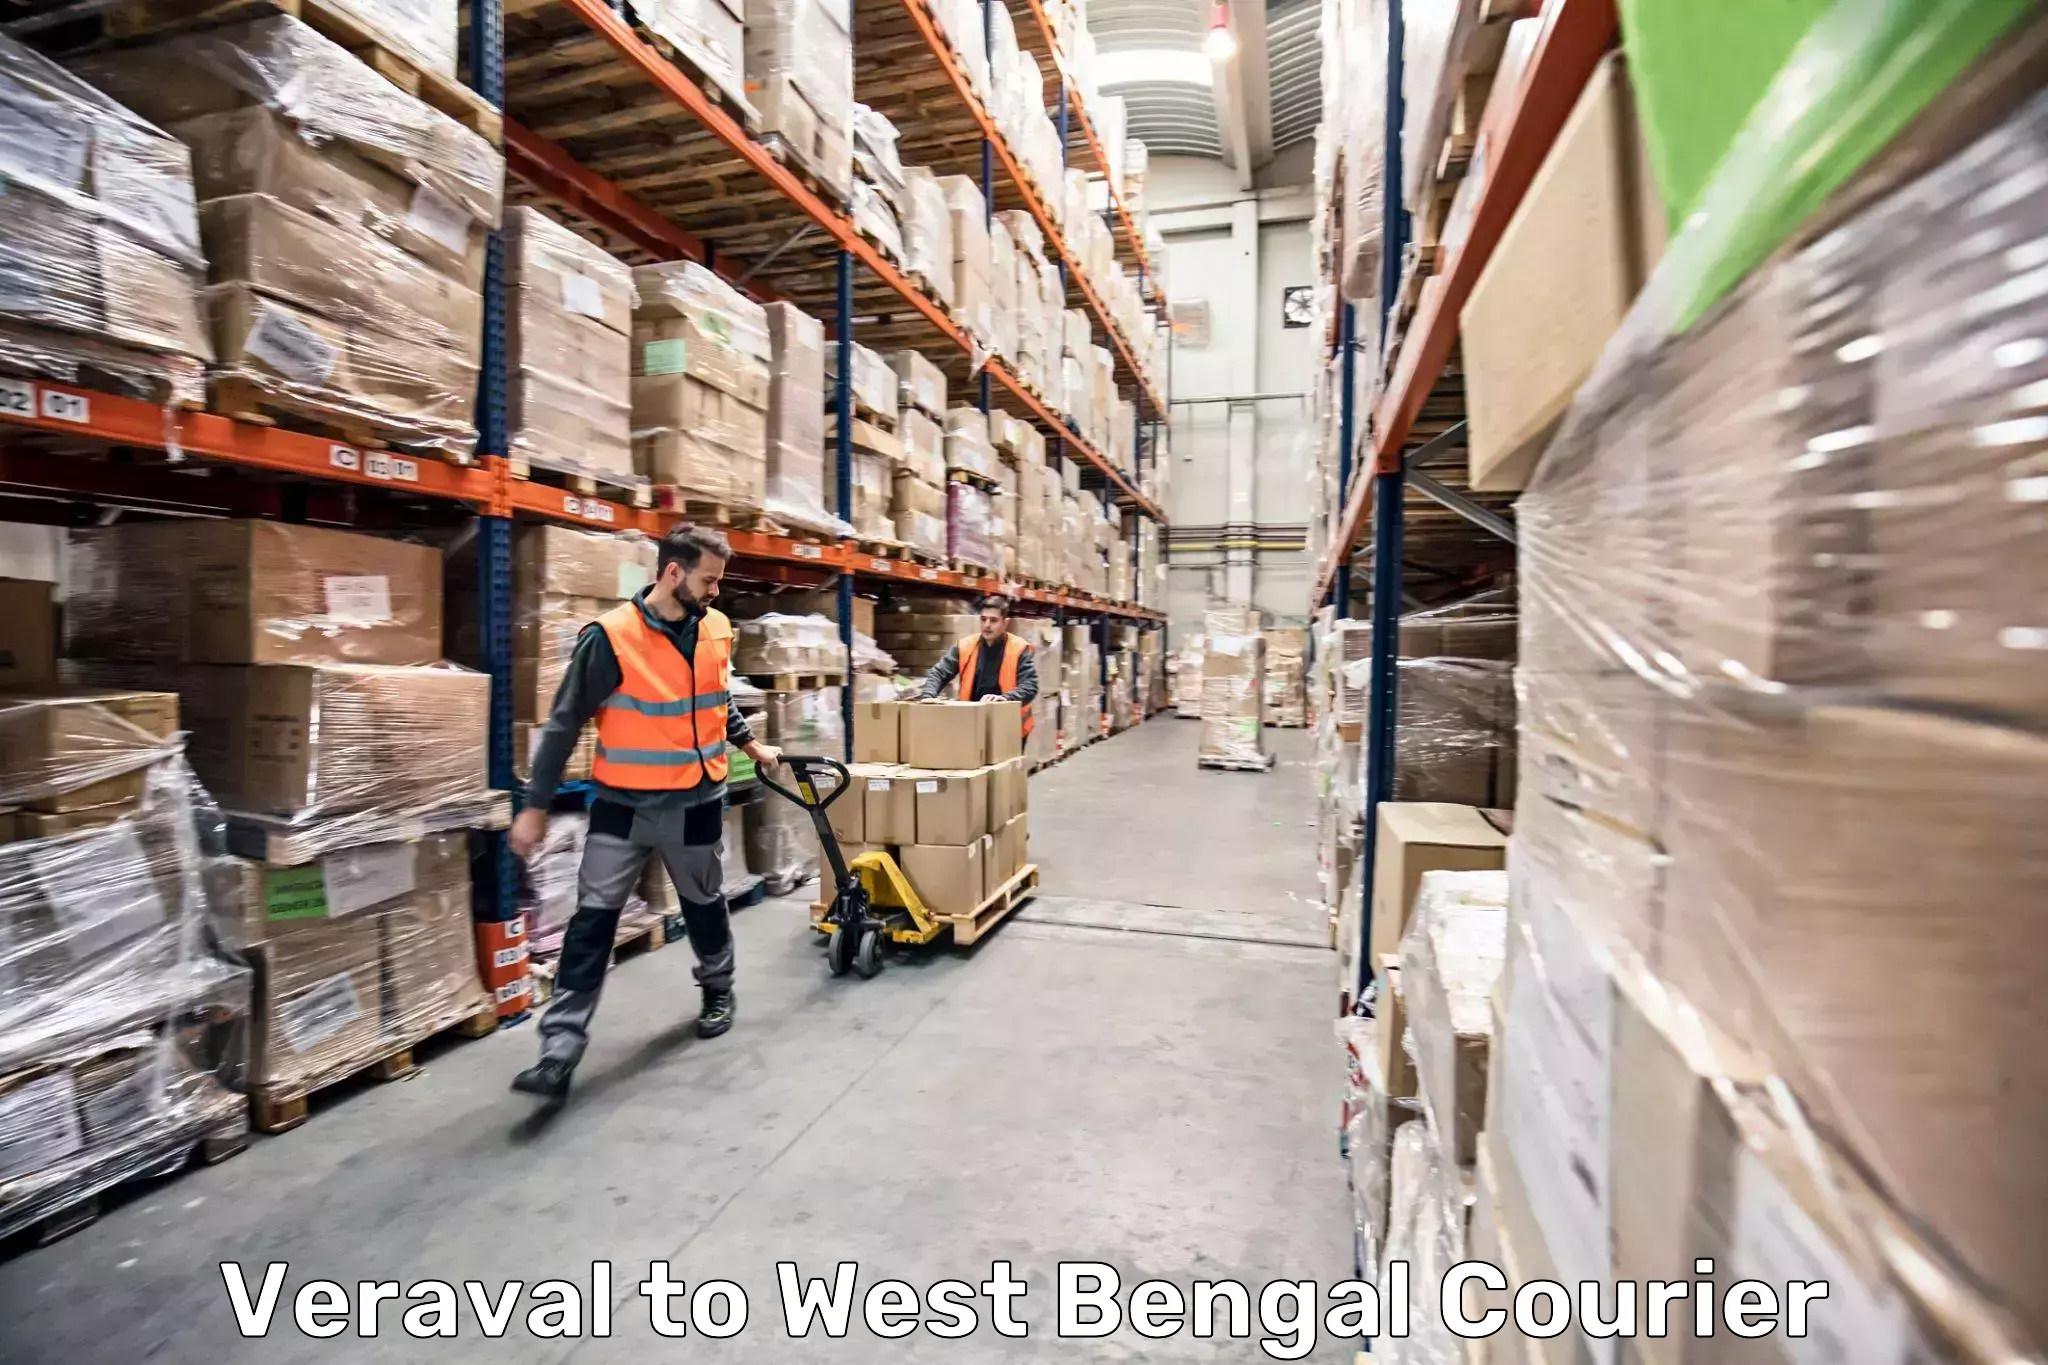 Luggage shipping specialists Veraval to West Bengal